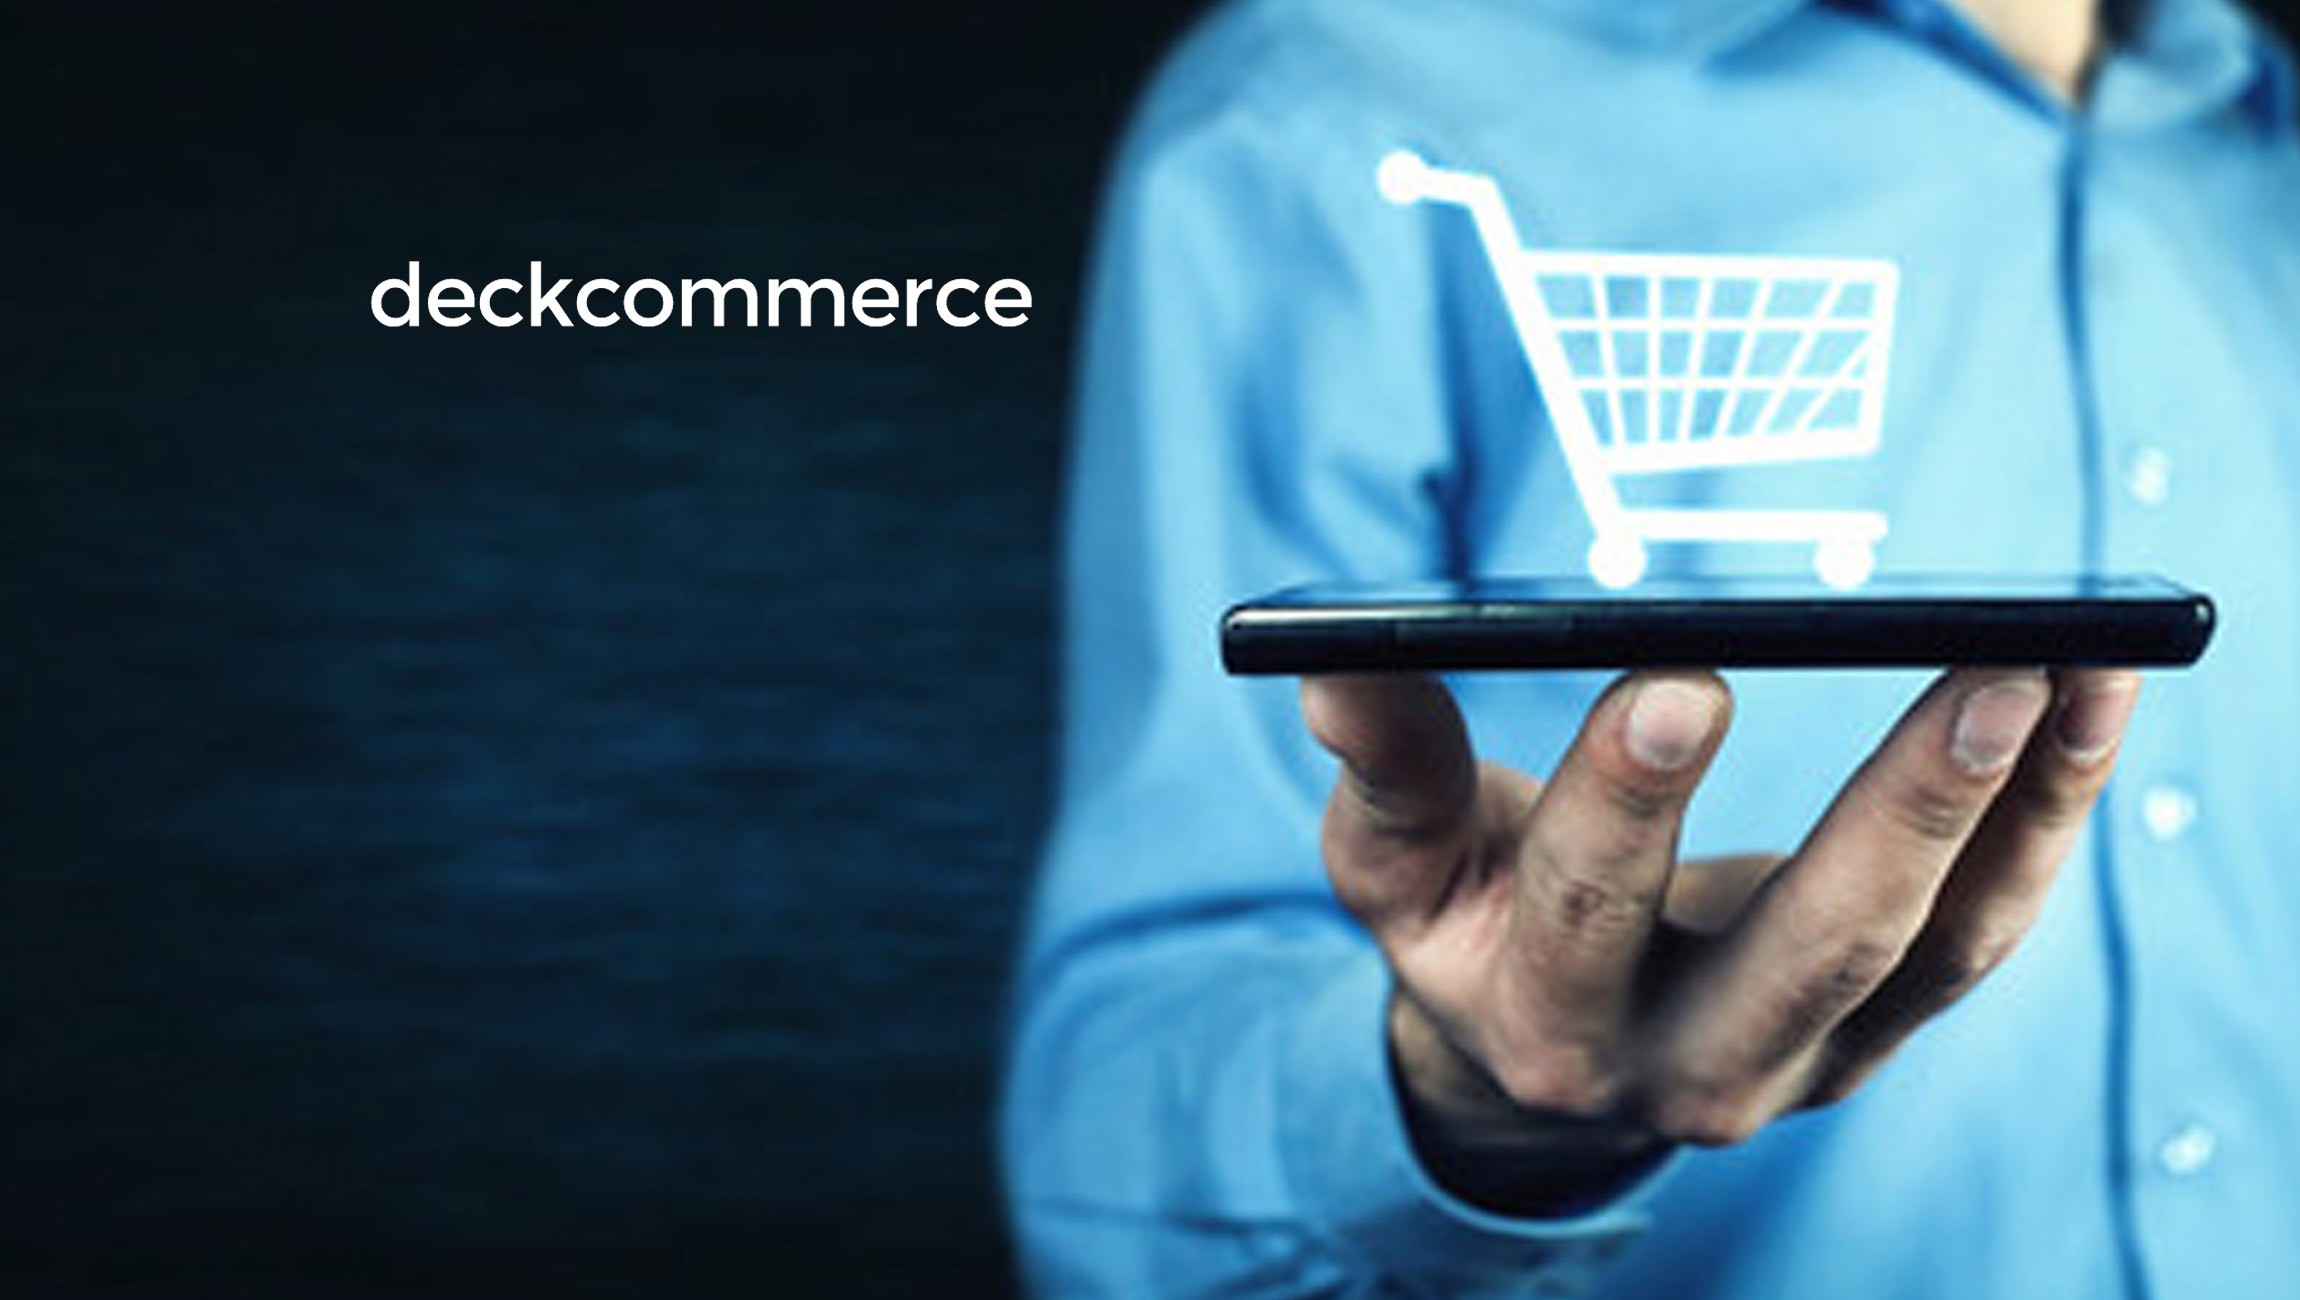 D2C-Retailers-Improve-Customer-Experience-and-Reduce-Strain-on-Final-Mile-by-Investing-in-Omnichannel-Technologies